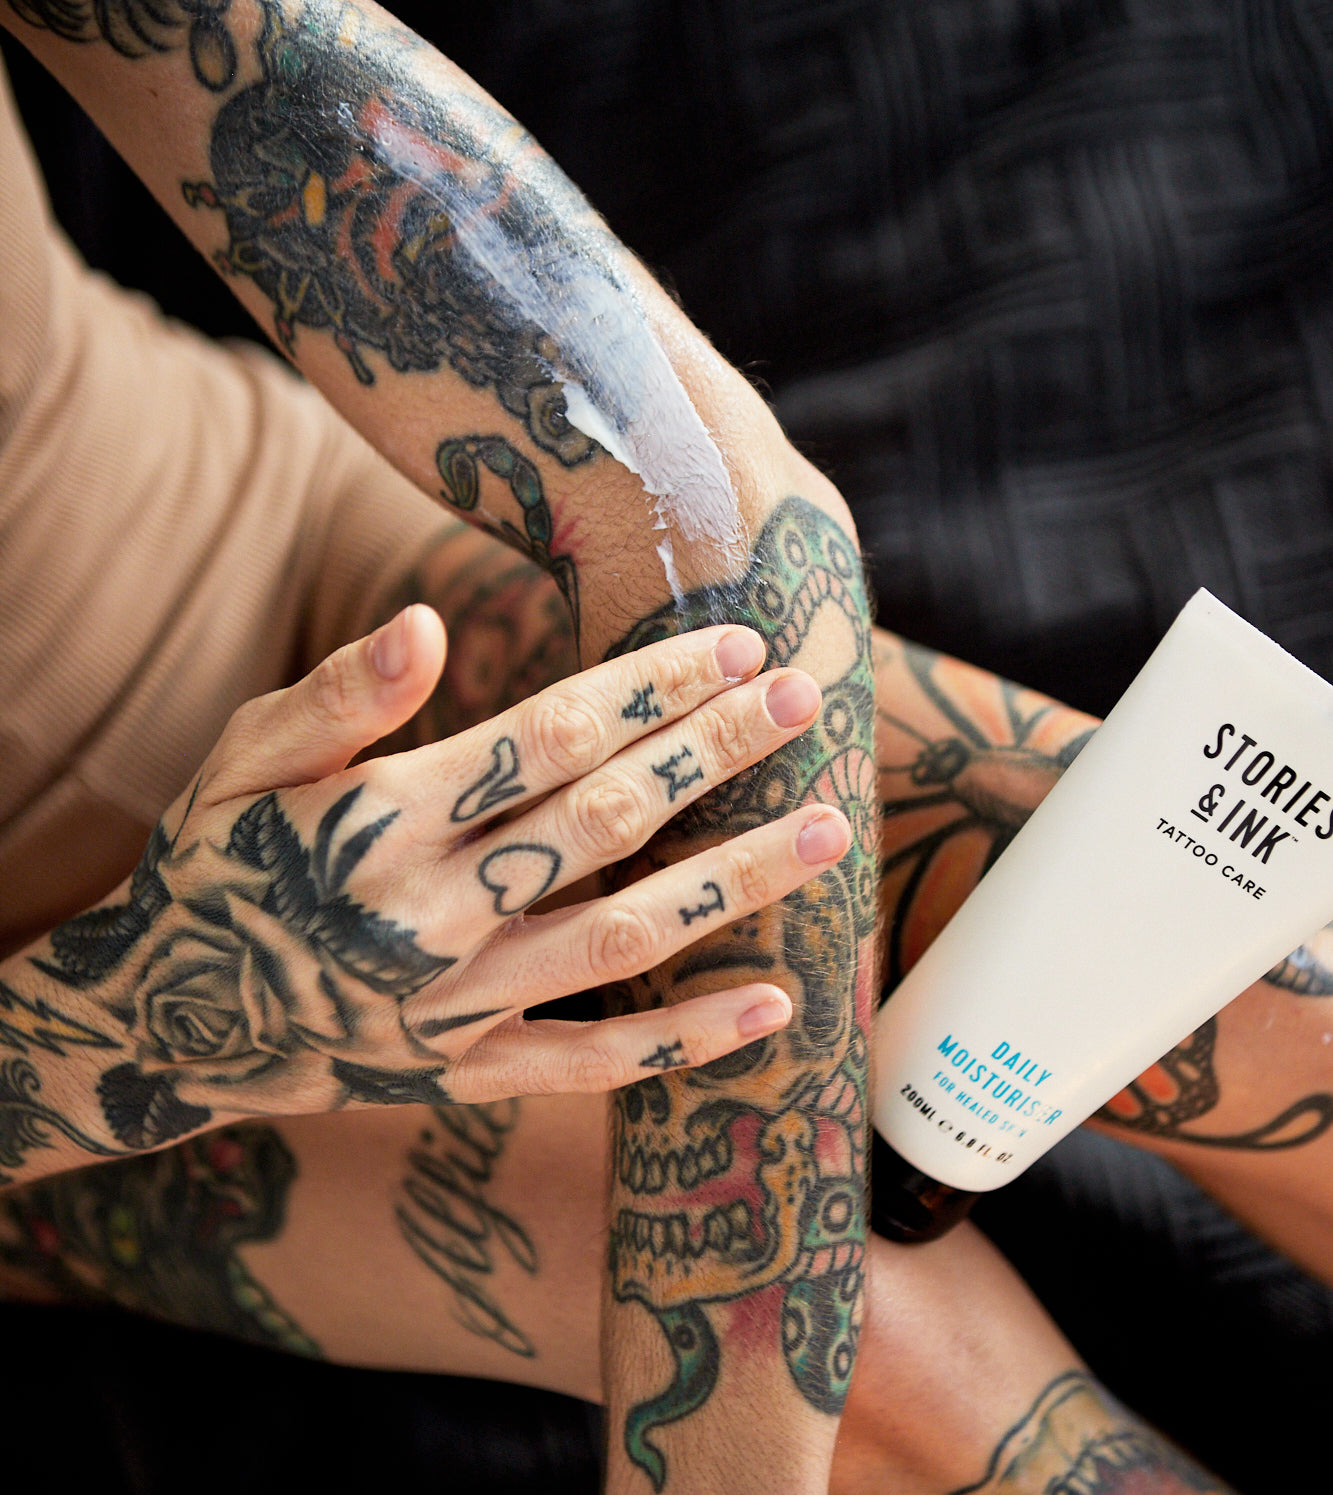 Tattoo Aftercare Guide: How to take care of Your New Tattoo - VitaliTree -  Naturally Innovative LLC